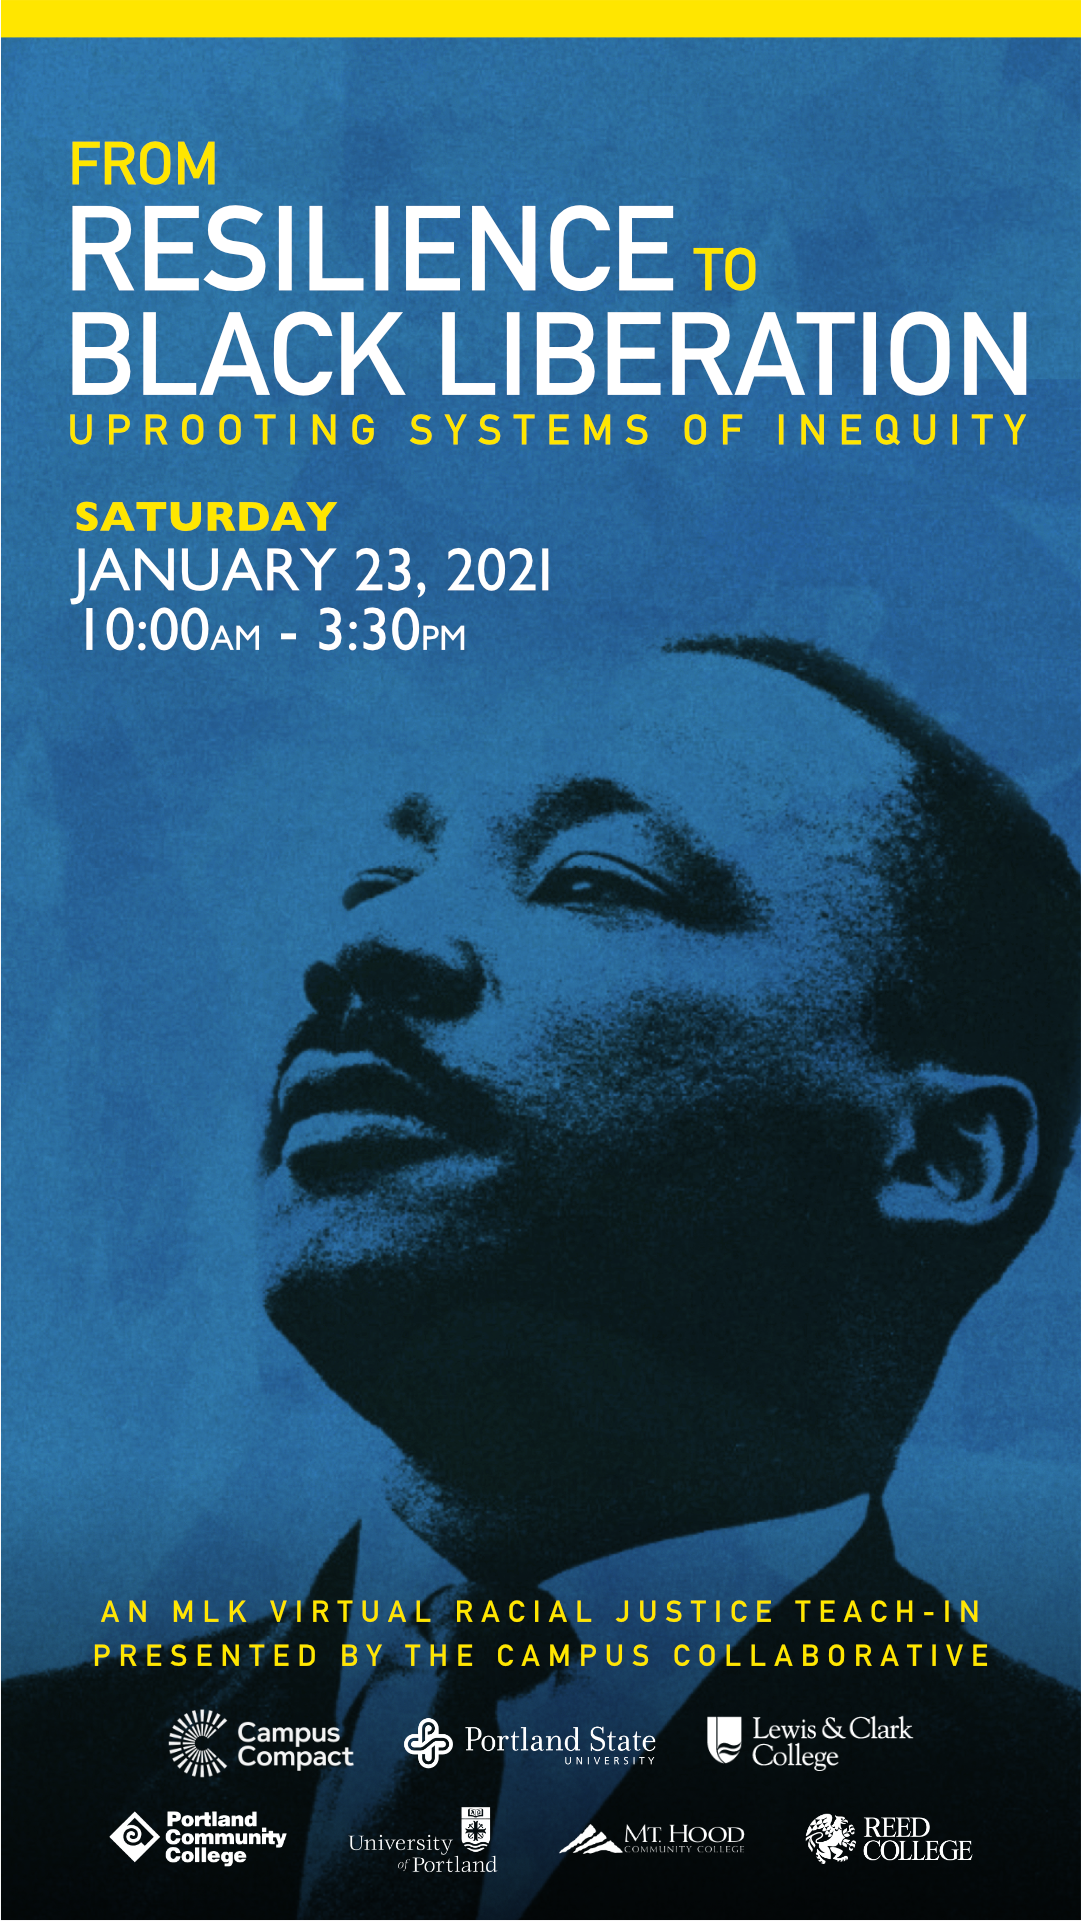 Image of MLK with event details overlaid